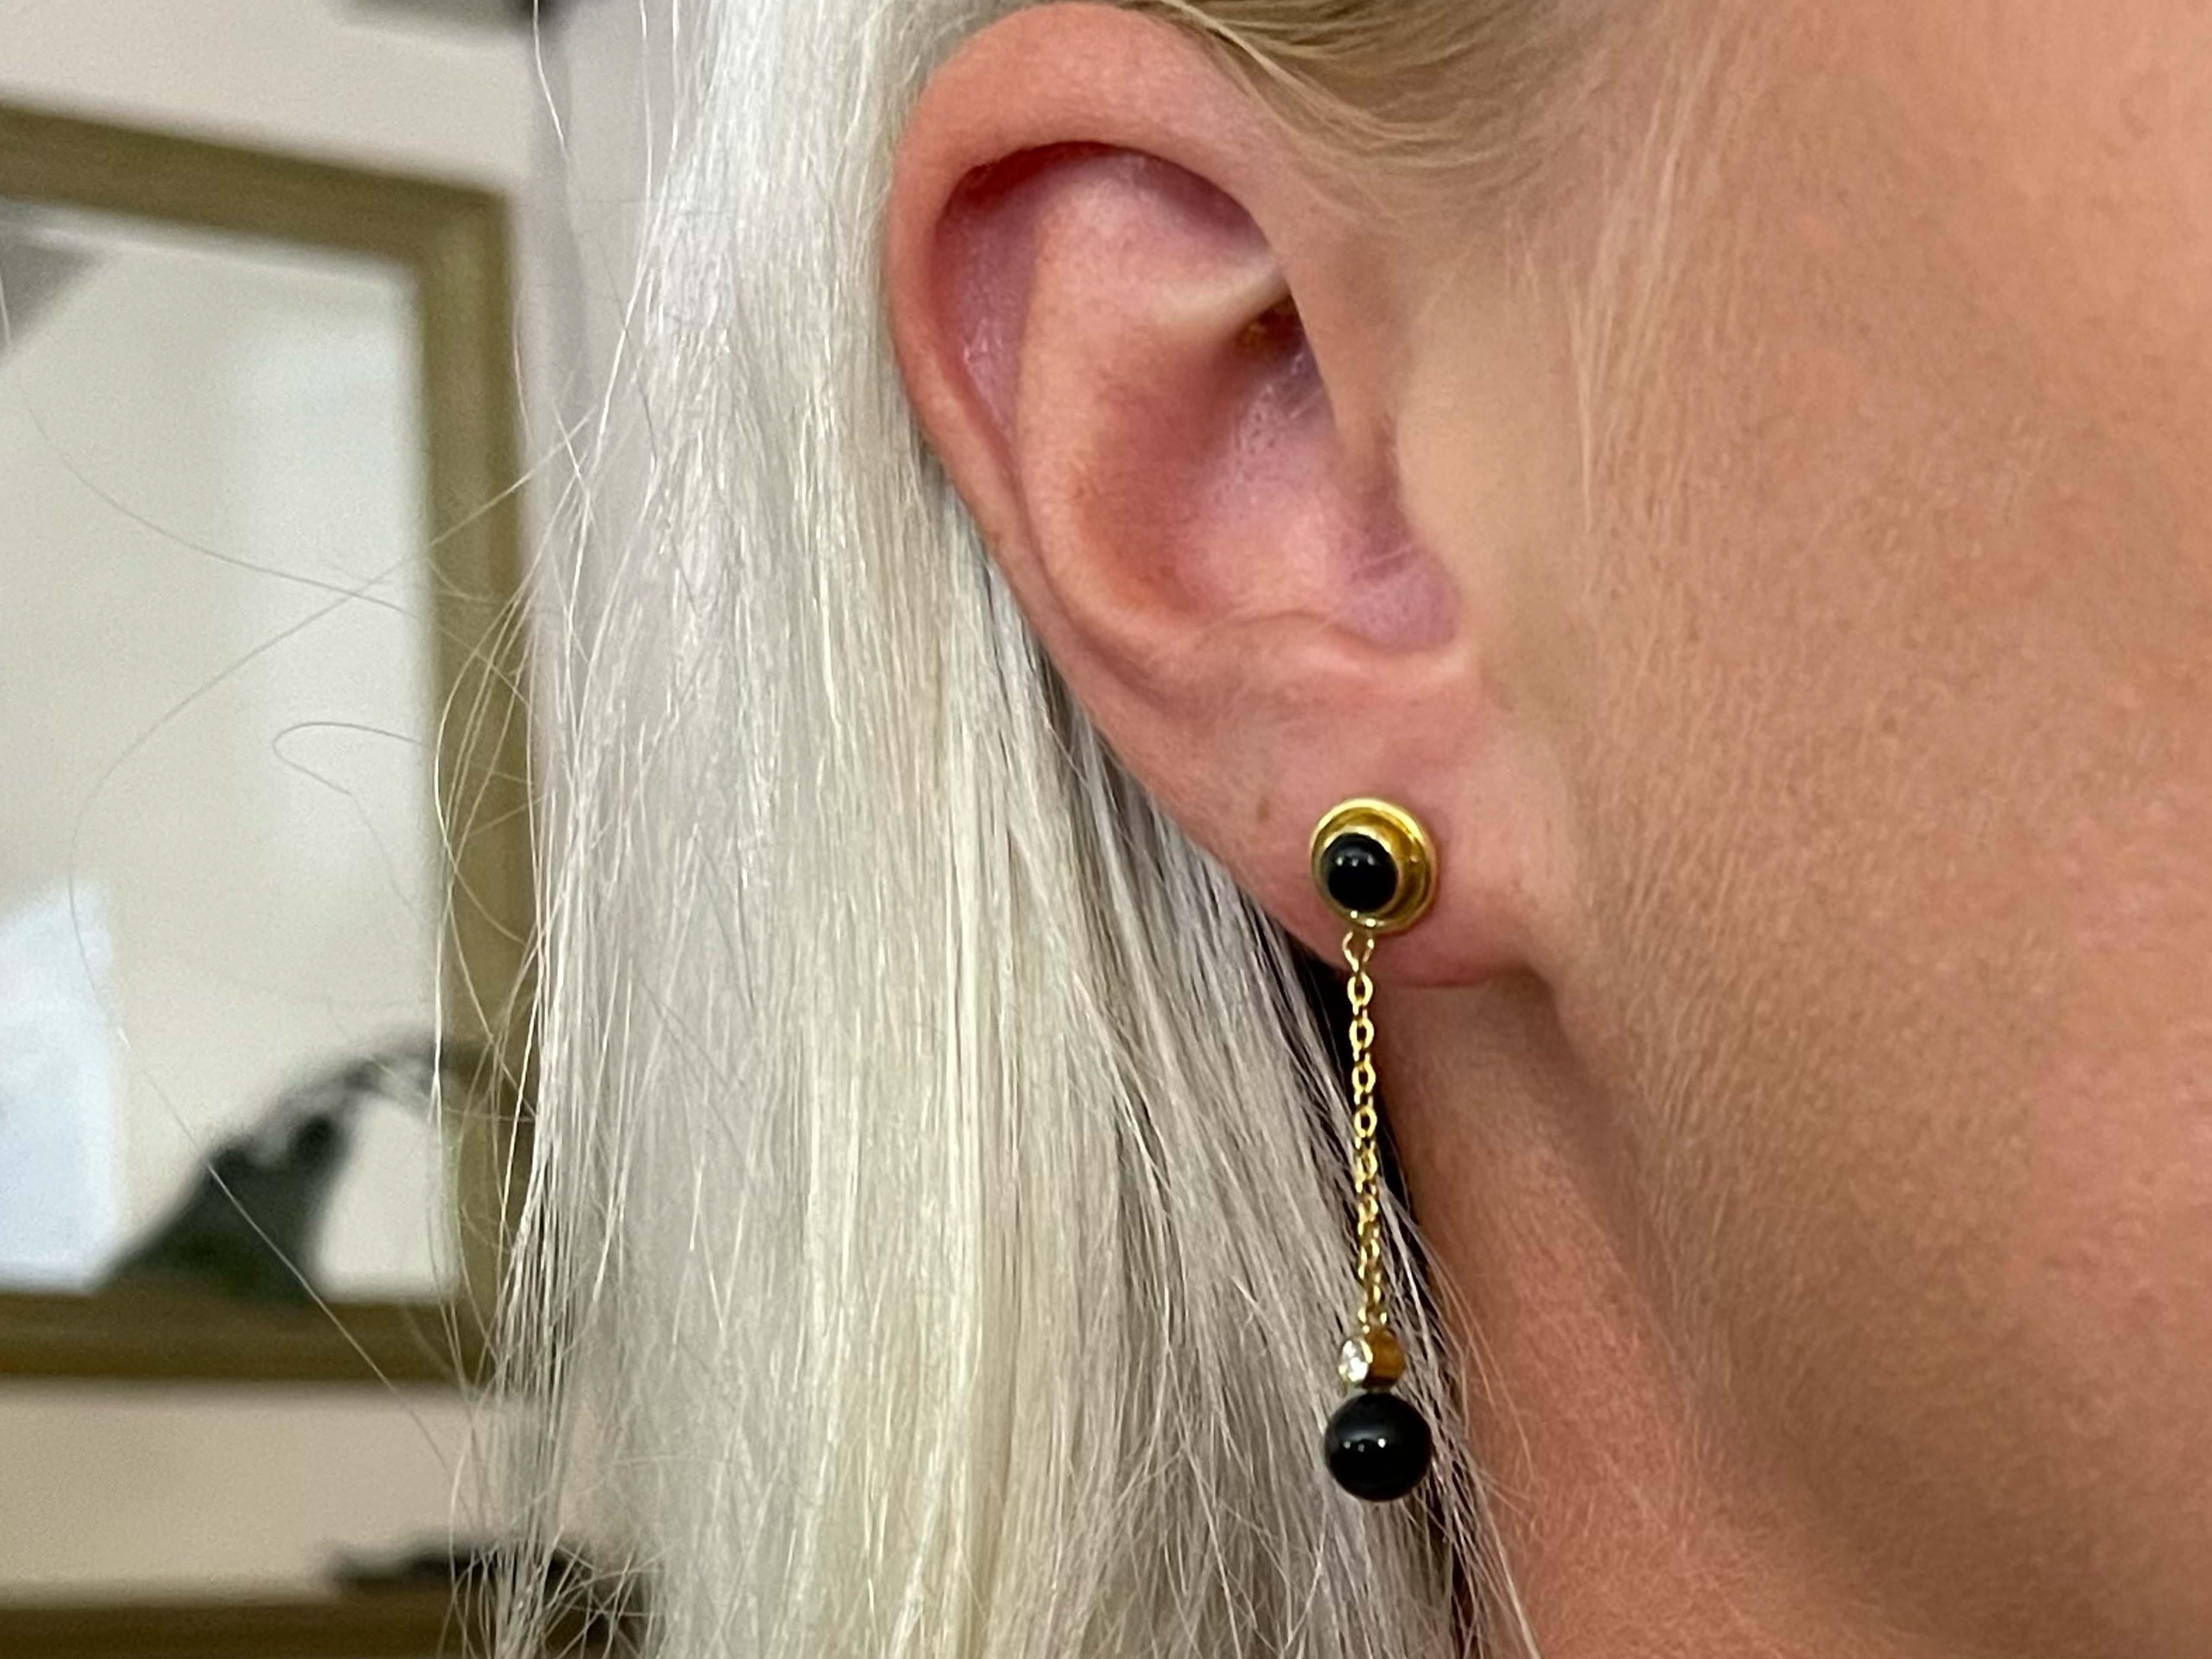 Tiffany & Co. Diamond & Black Onyx Dangle Earrings in 18k Yellow Gold.  Classic and elegant these earrings feature a gold stud bezel set with a black cabochon round onyx.  Suspended from the stud by a thin cable link chain is a bezel set round